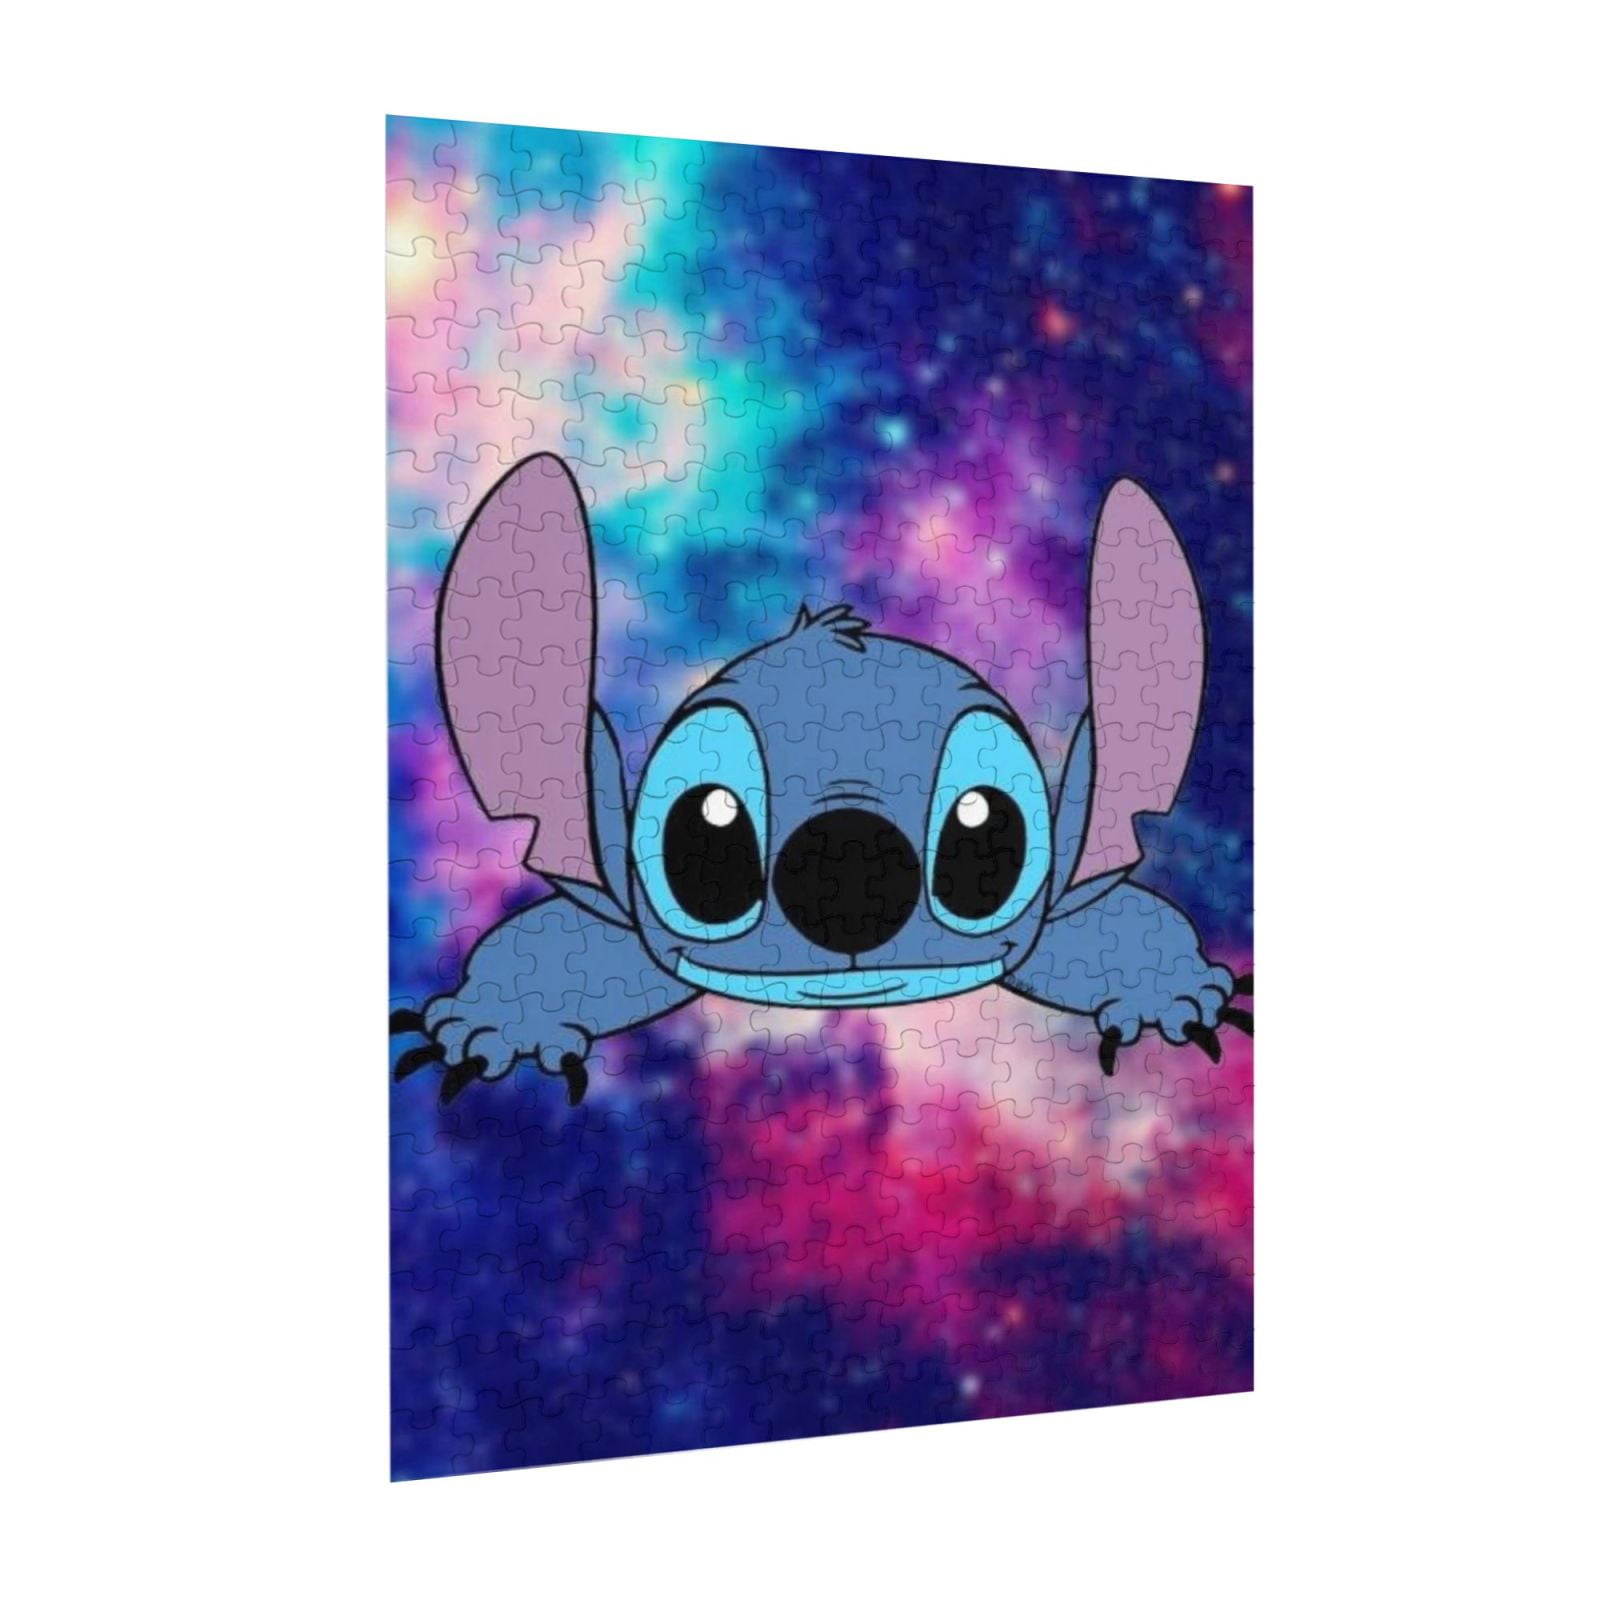 300 Piece Jigsaw Puzzle For Adults & Kids - Cute Stitch Puzzle For Boys  Girls Puzzle Enthusiasts